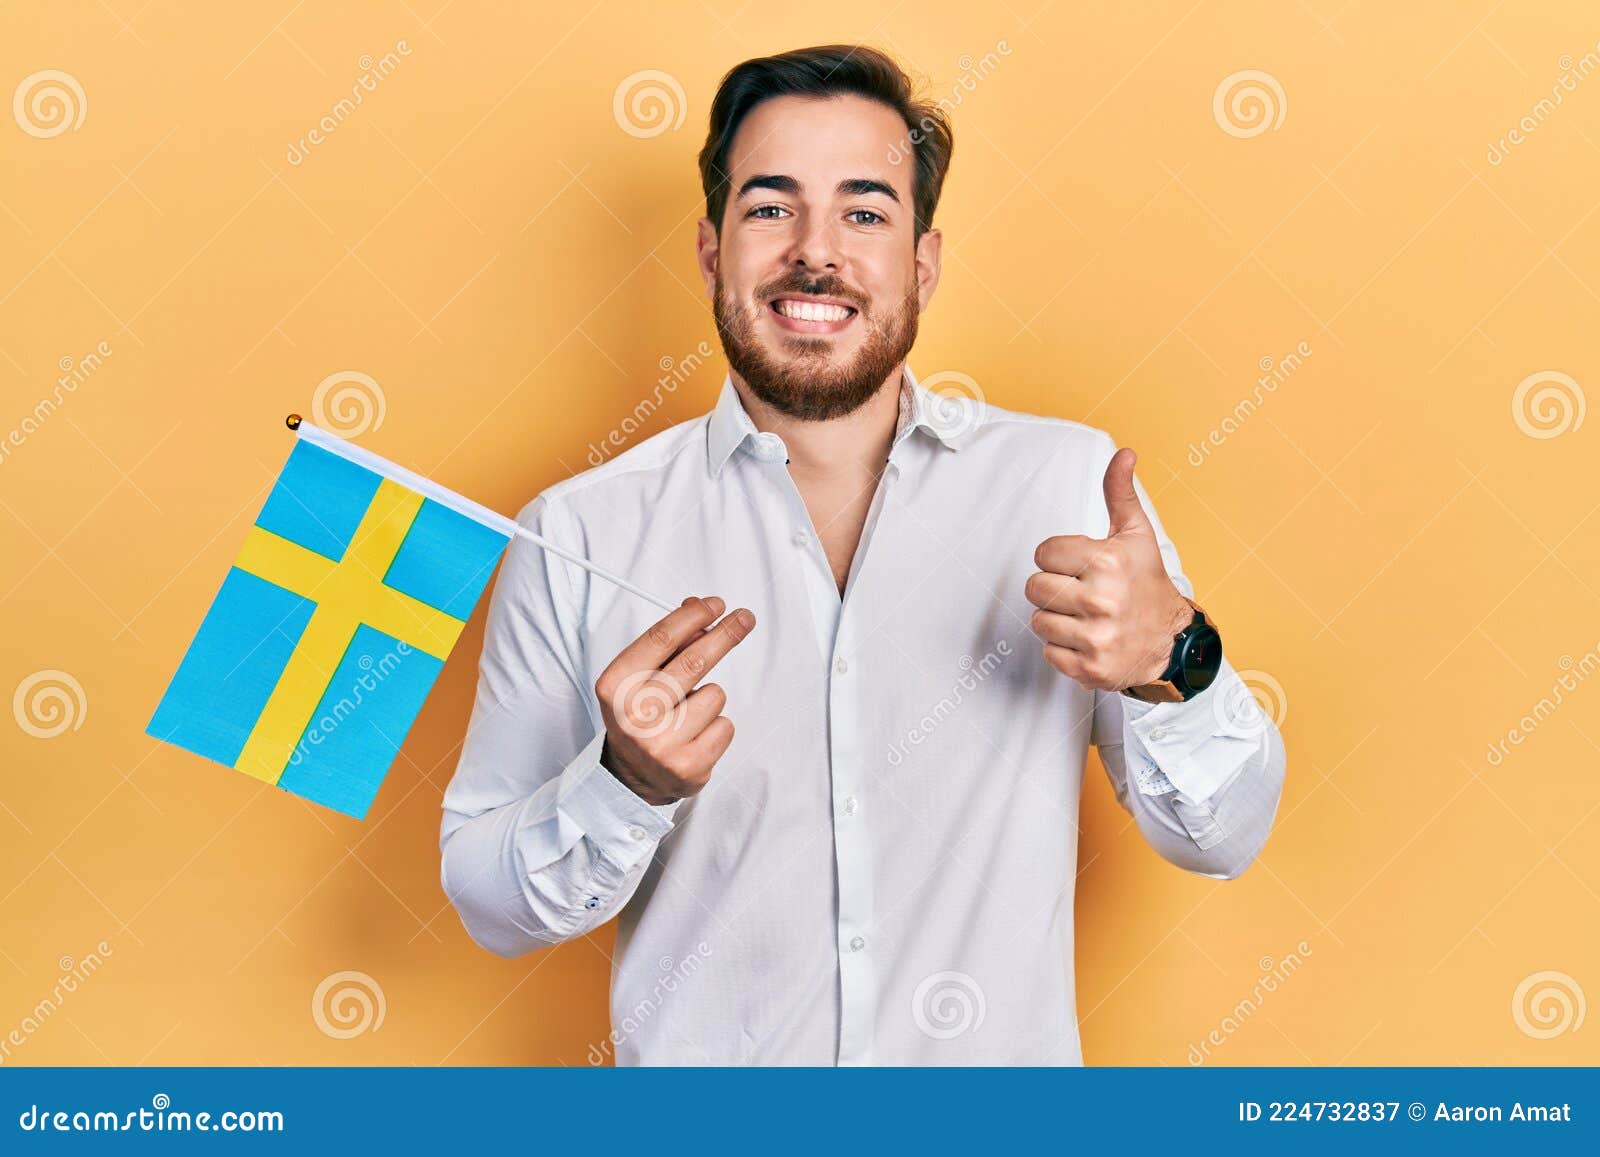 Handsome Caucasian Man with Beard Holding Sweden Flag Smiling Happy and ...